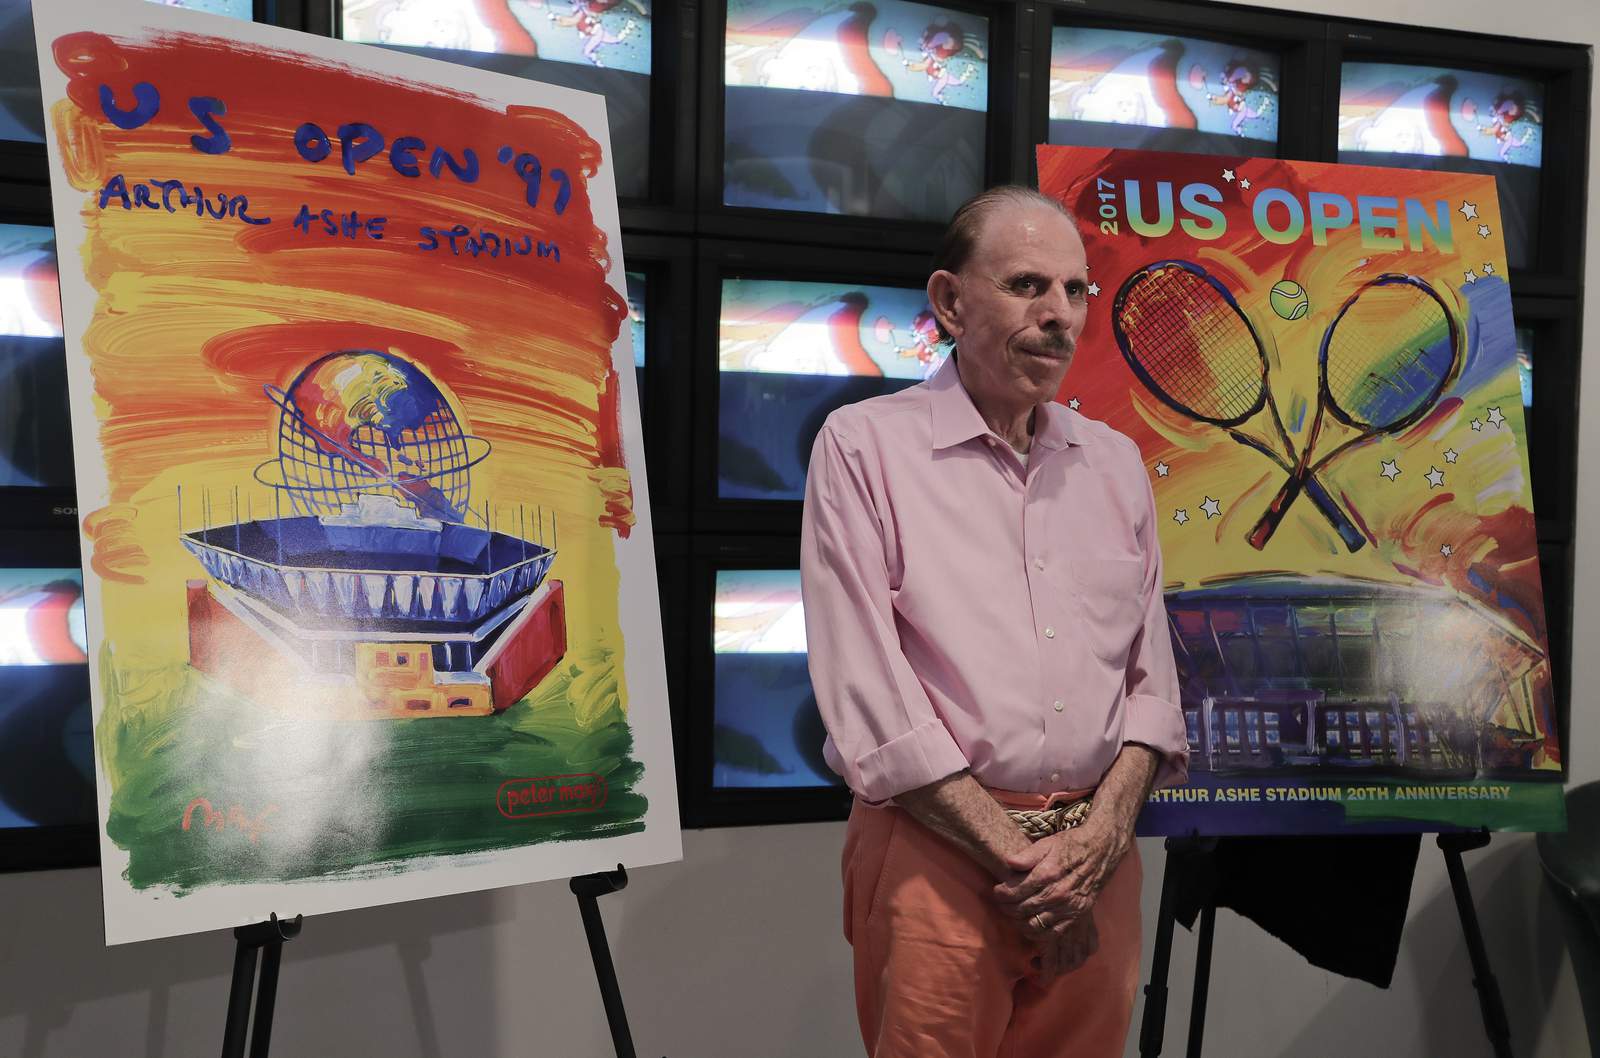 Court rules against artist Peter Max over damaged works